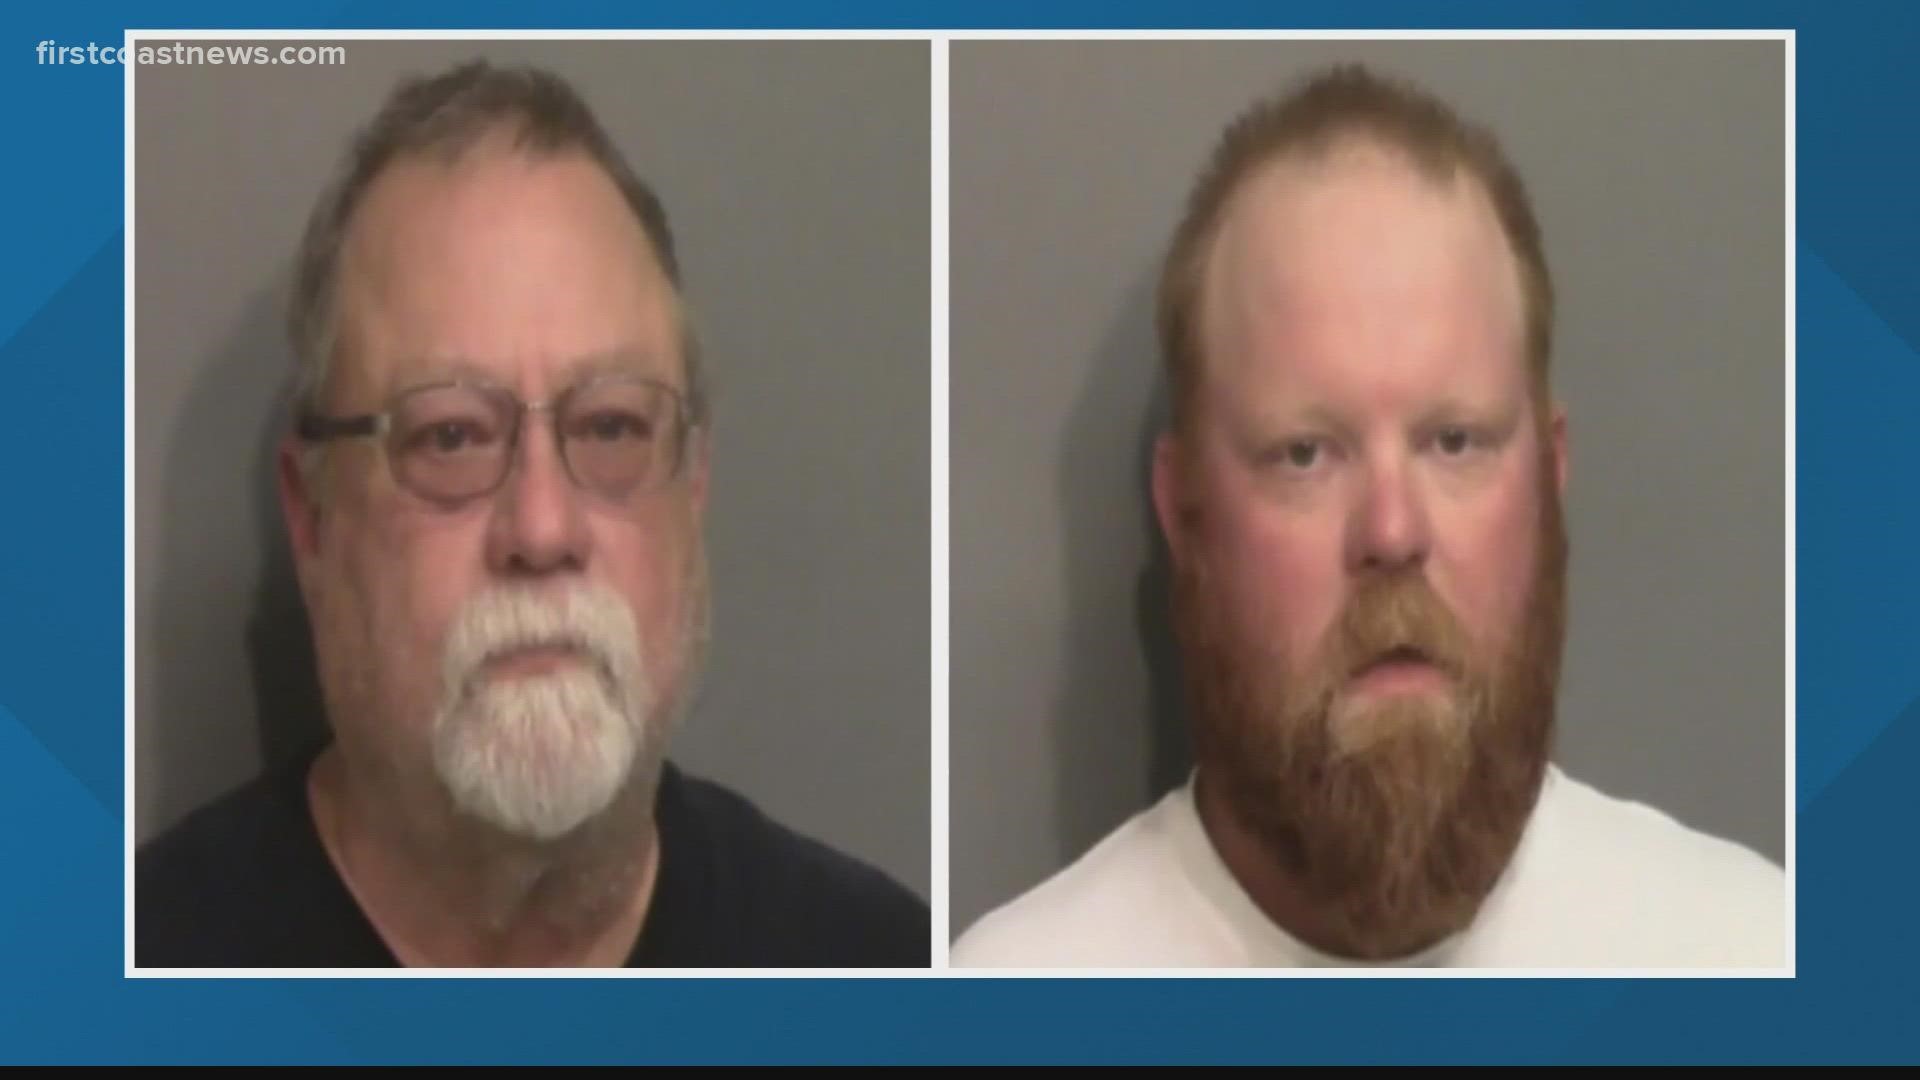 Gregory and Travis McMichael, as well as a neighbor, are both charged with murder in Arbery's death.